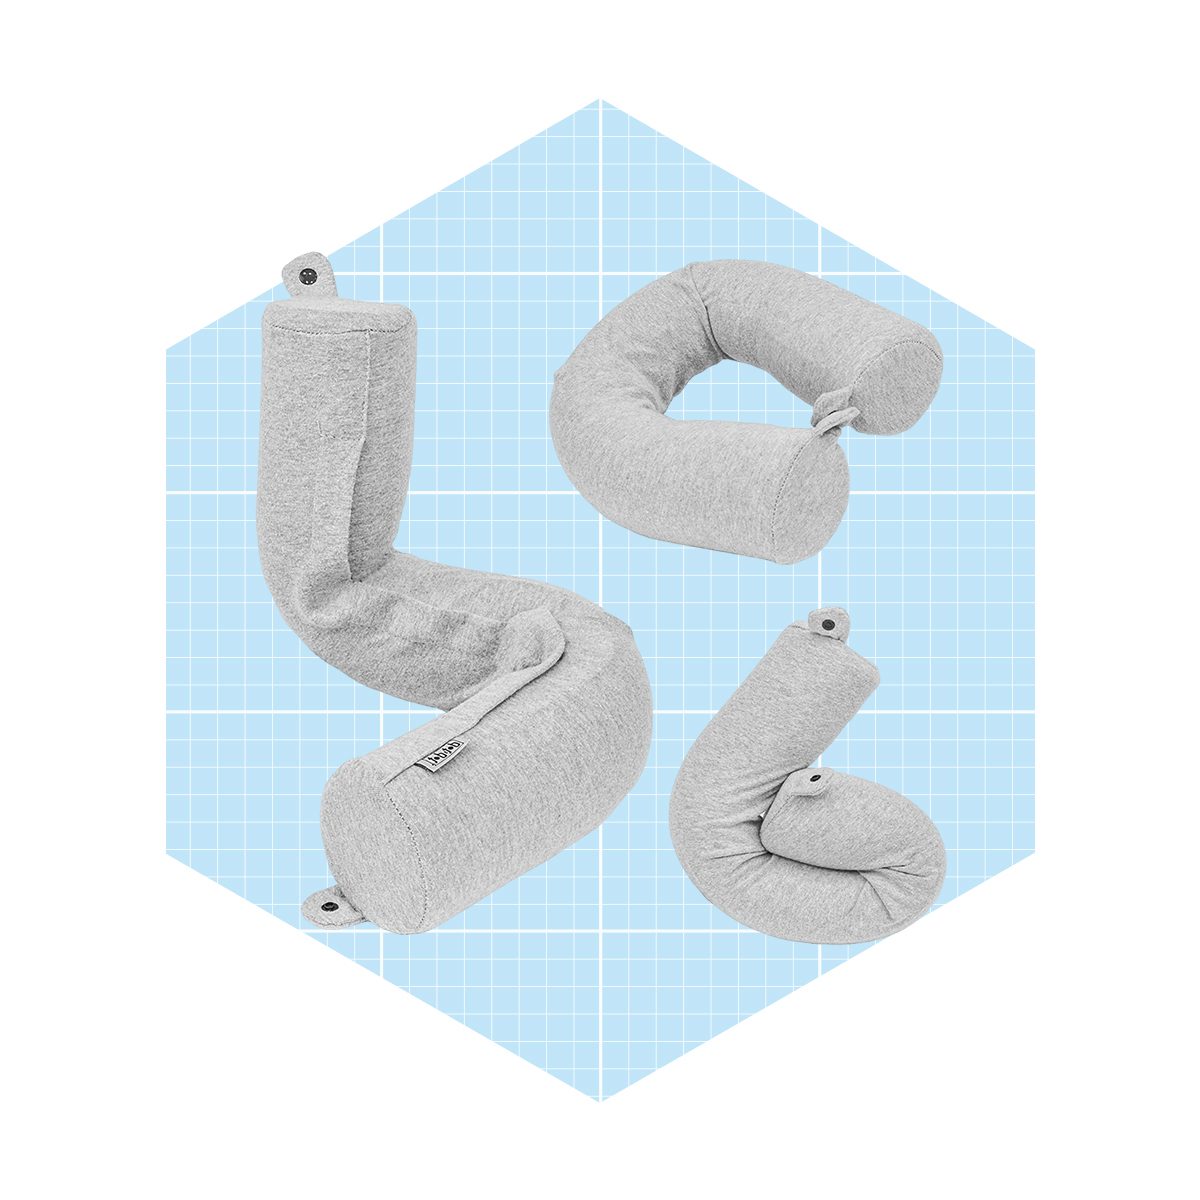 <p>Of all the road trip essentials you'll pack for your trip, a comfortable travel pillow should be at the top of the list. The <a href="https://www.amazon.com/Memory-Travel-Pillow-Lumbar-Support/dp/B01IEJHJWK" rel="noopener noreferrer">Dot&Dot Twist</a> is made of high-quality memory foam that conforms to your body, providing the perfect amount of support to relieve any discomfort or pain. Use its customizable design as a neck pillow or backrest. Its flexibility means you'll always find the perfect position to make your ride as comfortable as possible. This travel <a href="https://www.familyhandyman.com/list/best-pillows-for-sleep/" rel="noopener noreferrer">pillow</a> includes a removable and washable cover for easy cleaning on the road.</p> <p class="listicle-page__cta-button-shop"><a class="shop-btn" href="https://www.amazon.com/Memory-Travel-Pillow-Lumbar-Support/dp/B01IEJHJWK">Shop Now</a></p>